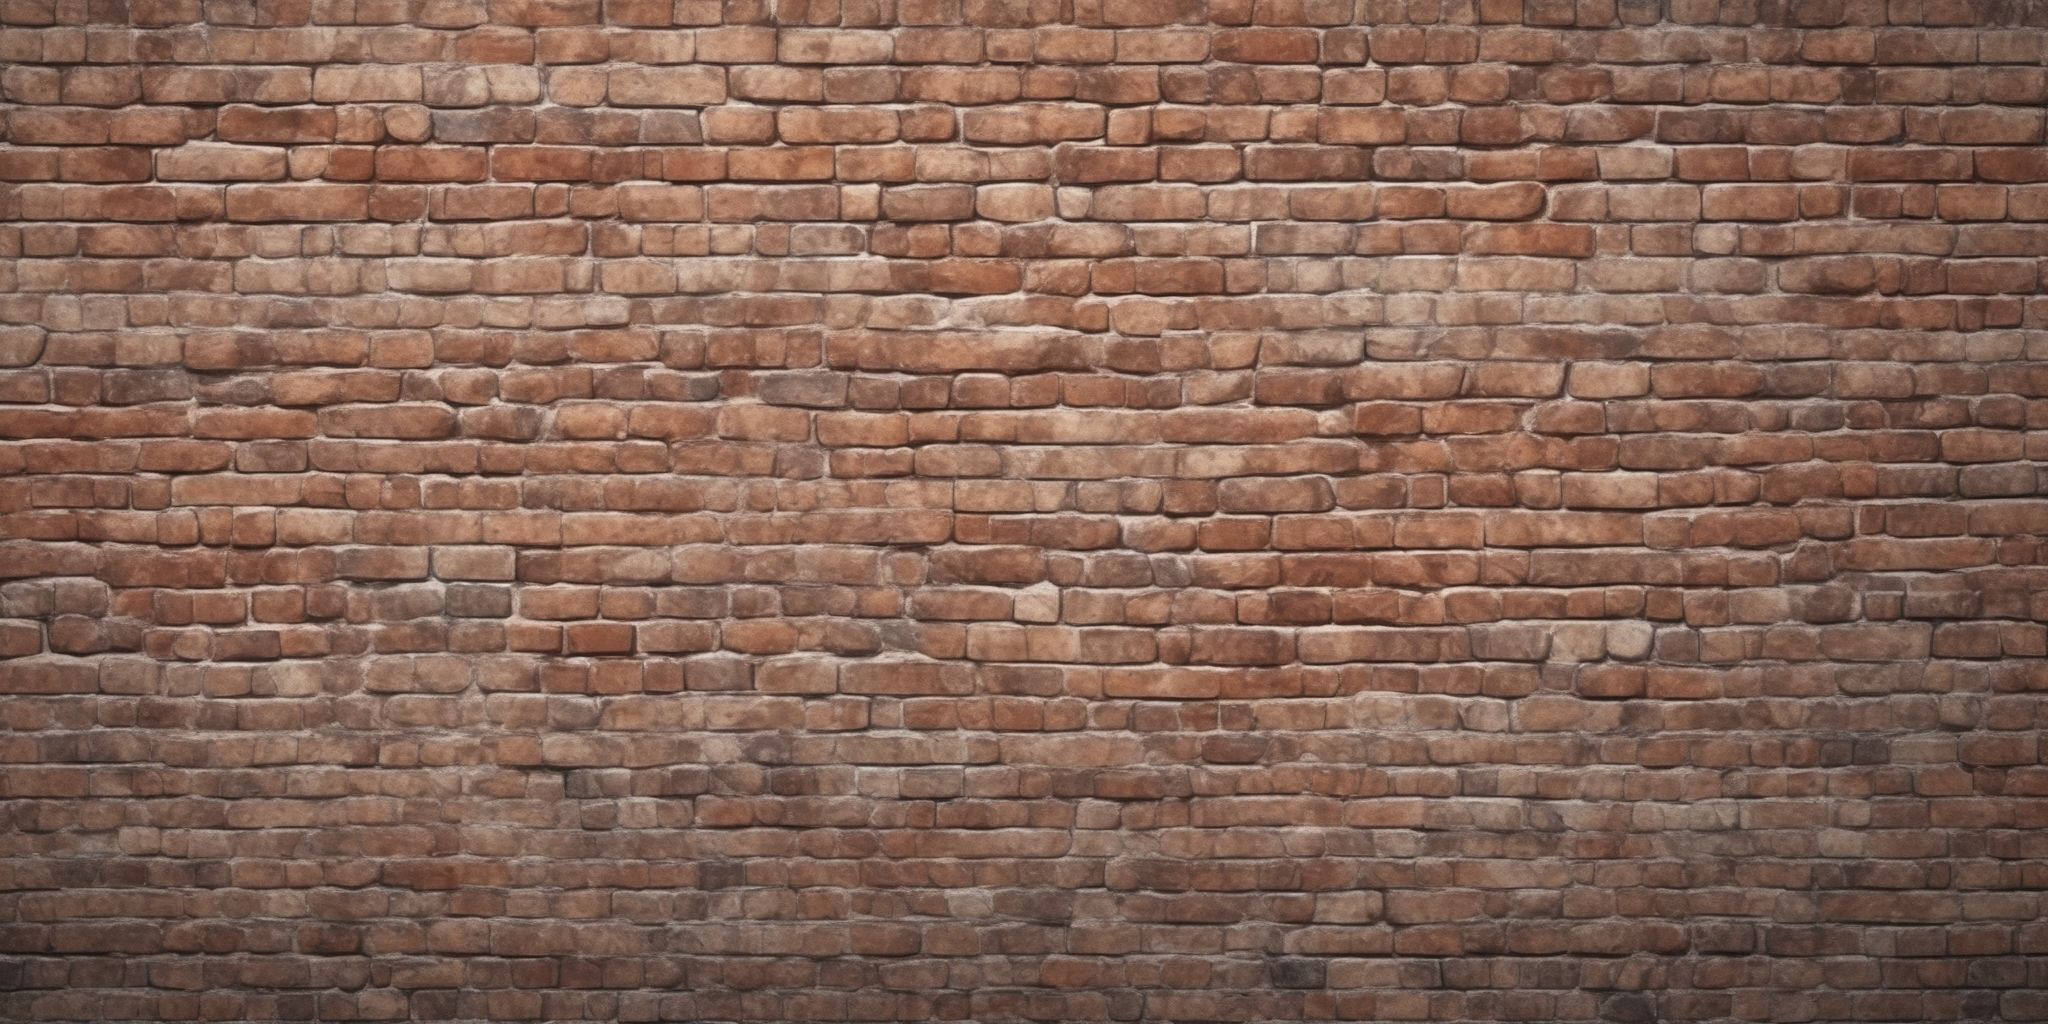 Wall  in realistic, photographic style